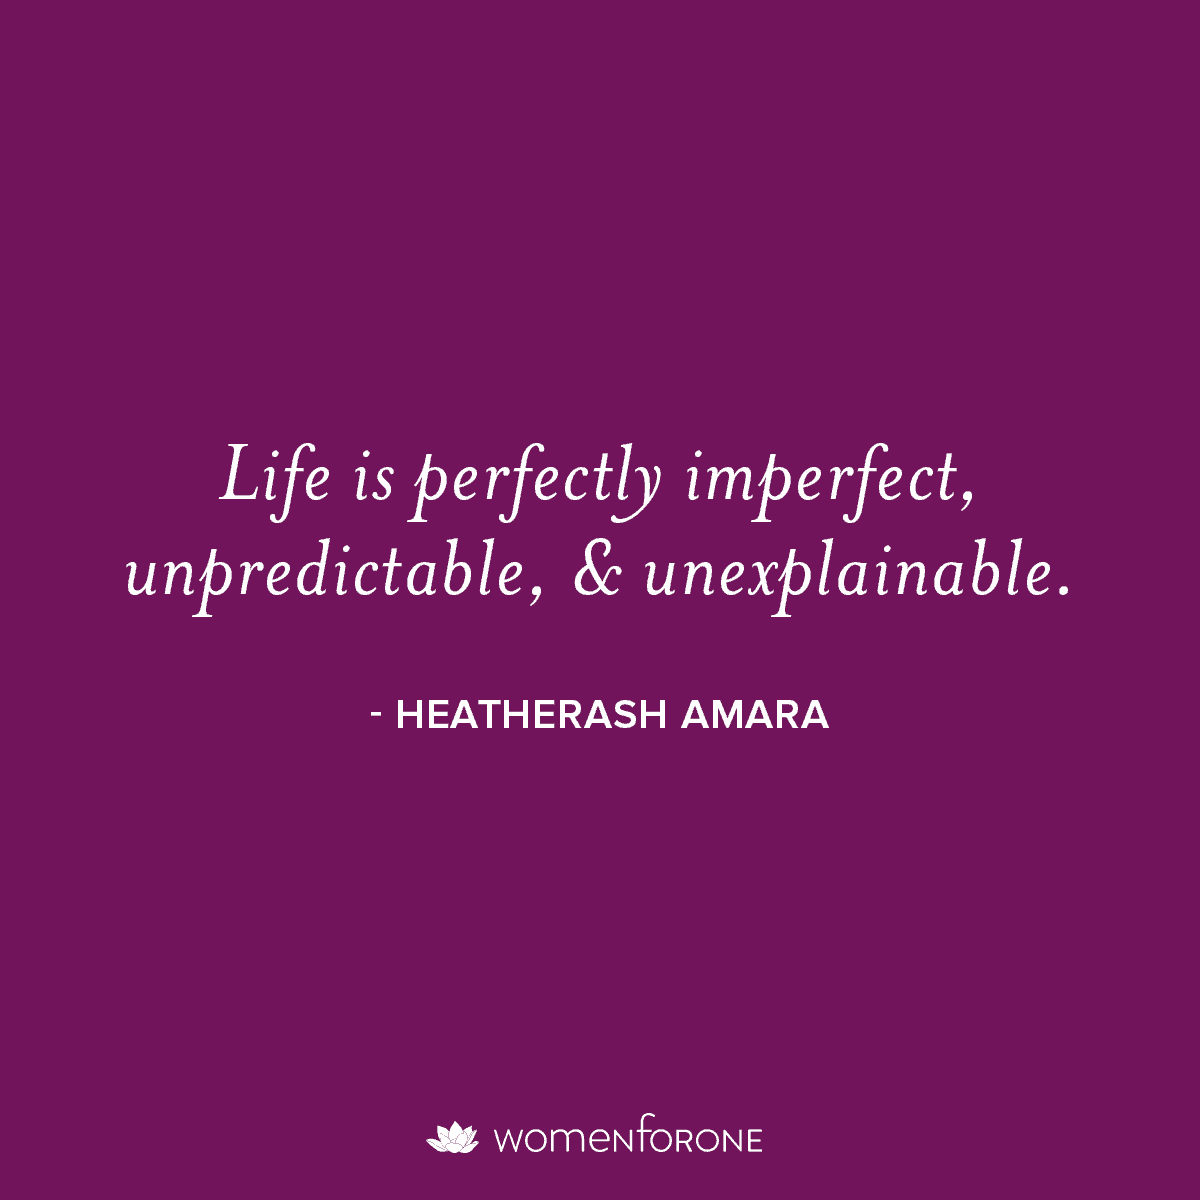 “The truth is simple: Life is perfectly imperfect, unpredictable, and unexplainable.” - Heatherash Amara